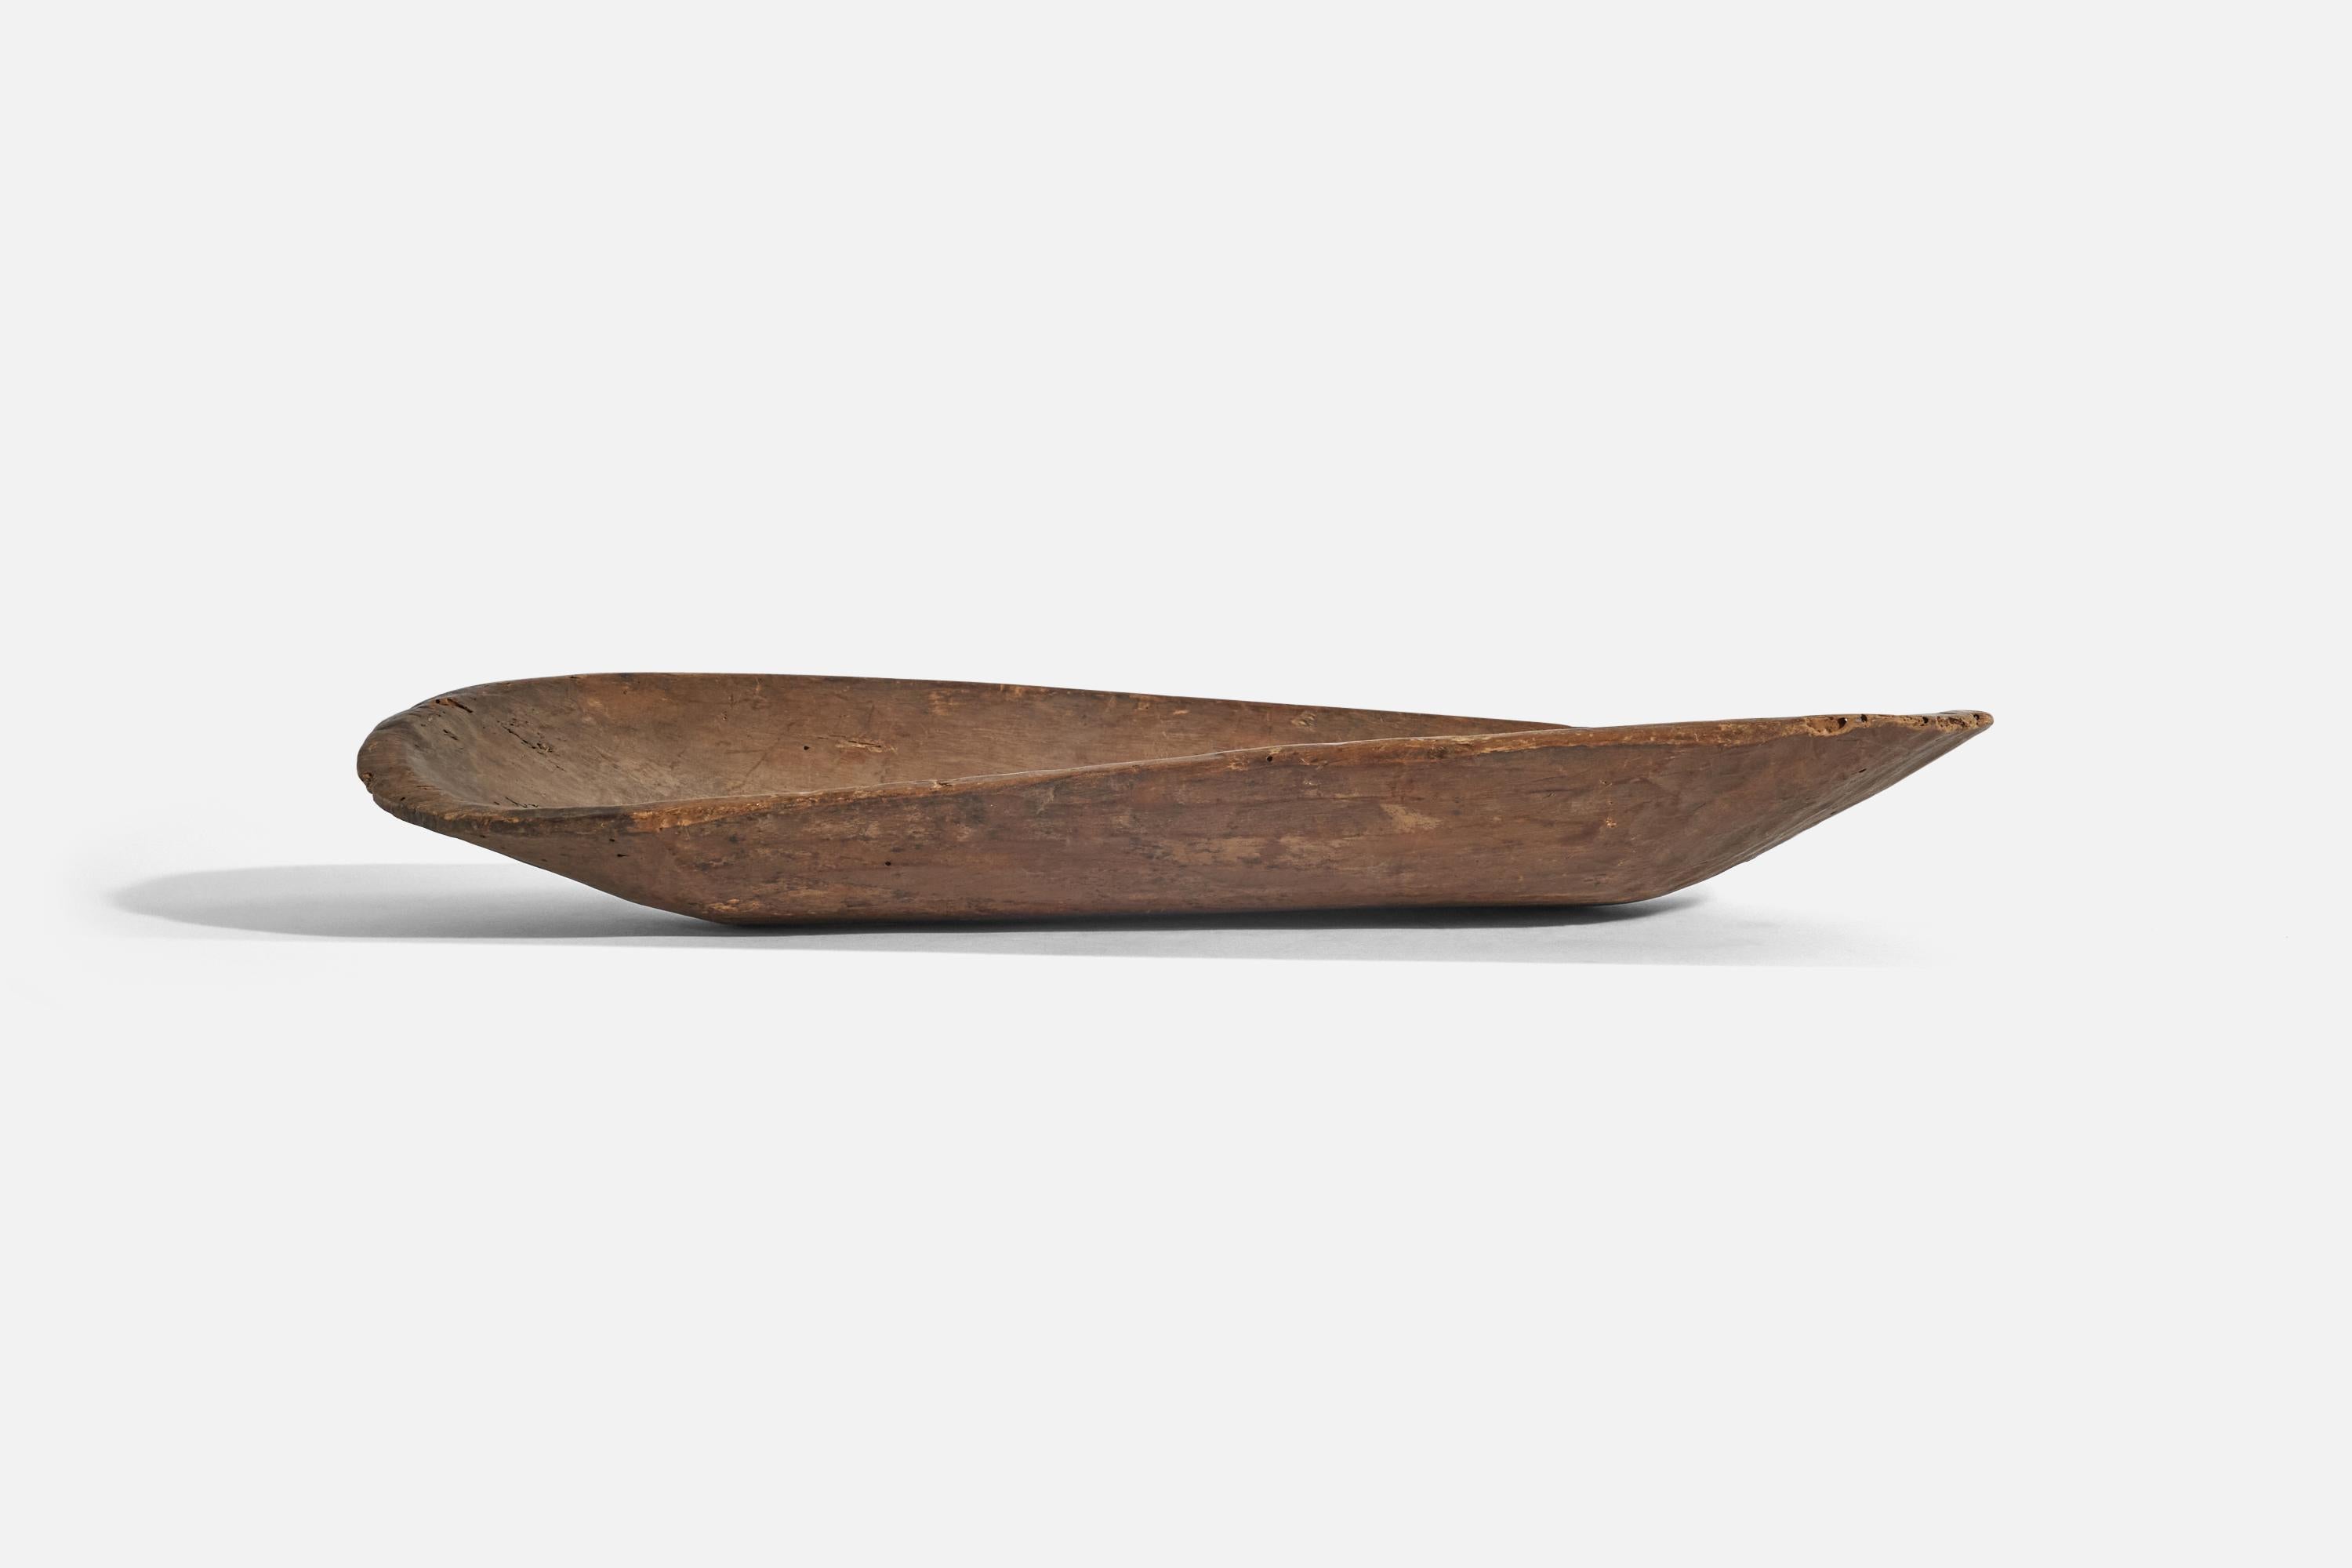 A wooden bowl or poche-vide designed and produced in Mexico, early 20th century.